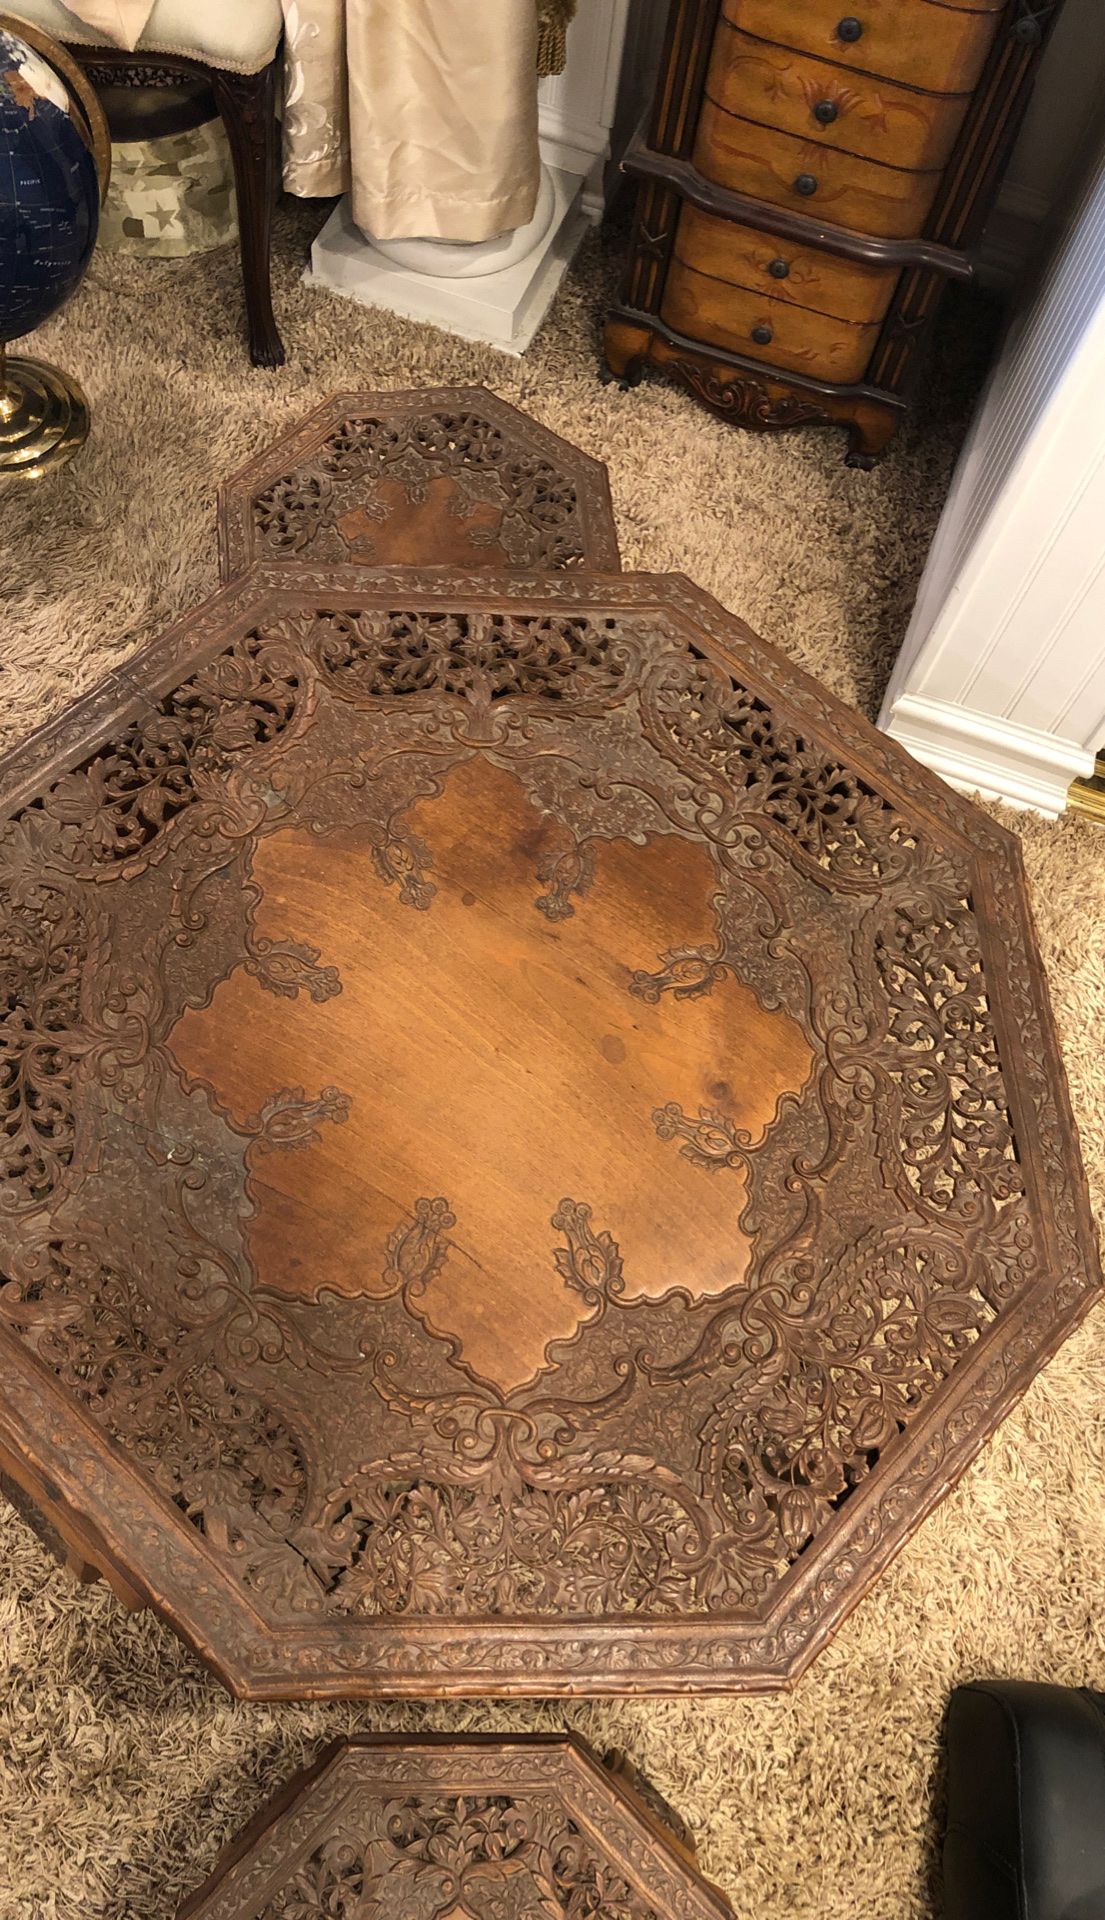 Beautiful antique carved table 4 benches- table measures 19” tall 34” round benches ea measures 15” tall by 15” round beautiful design